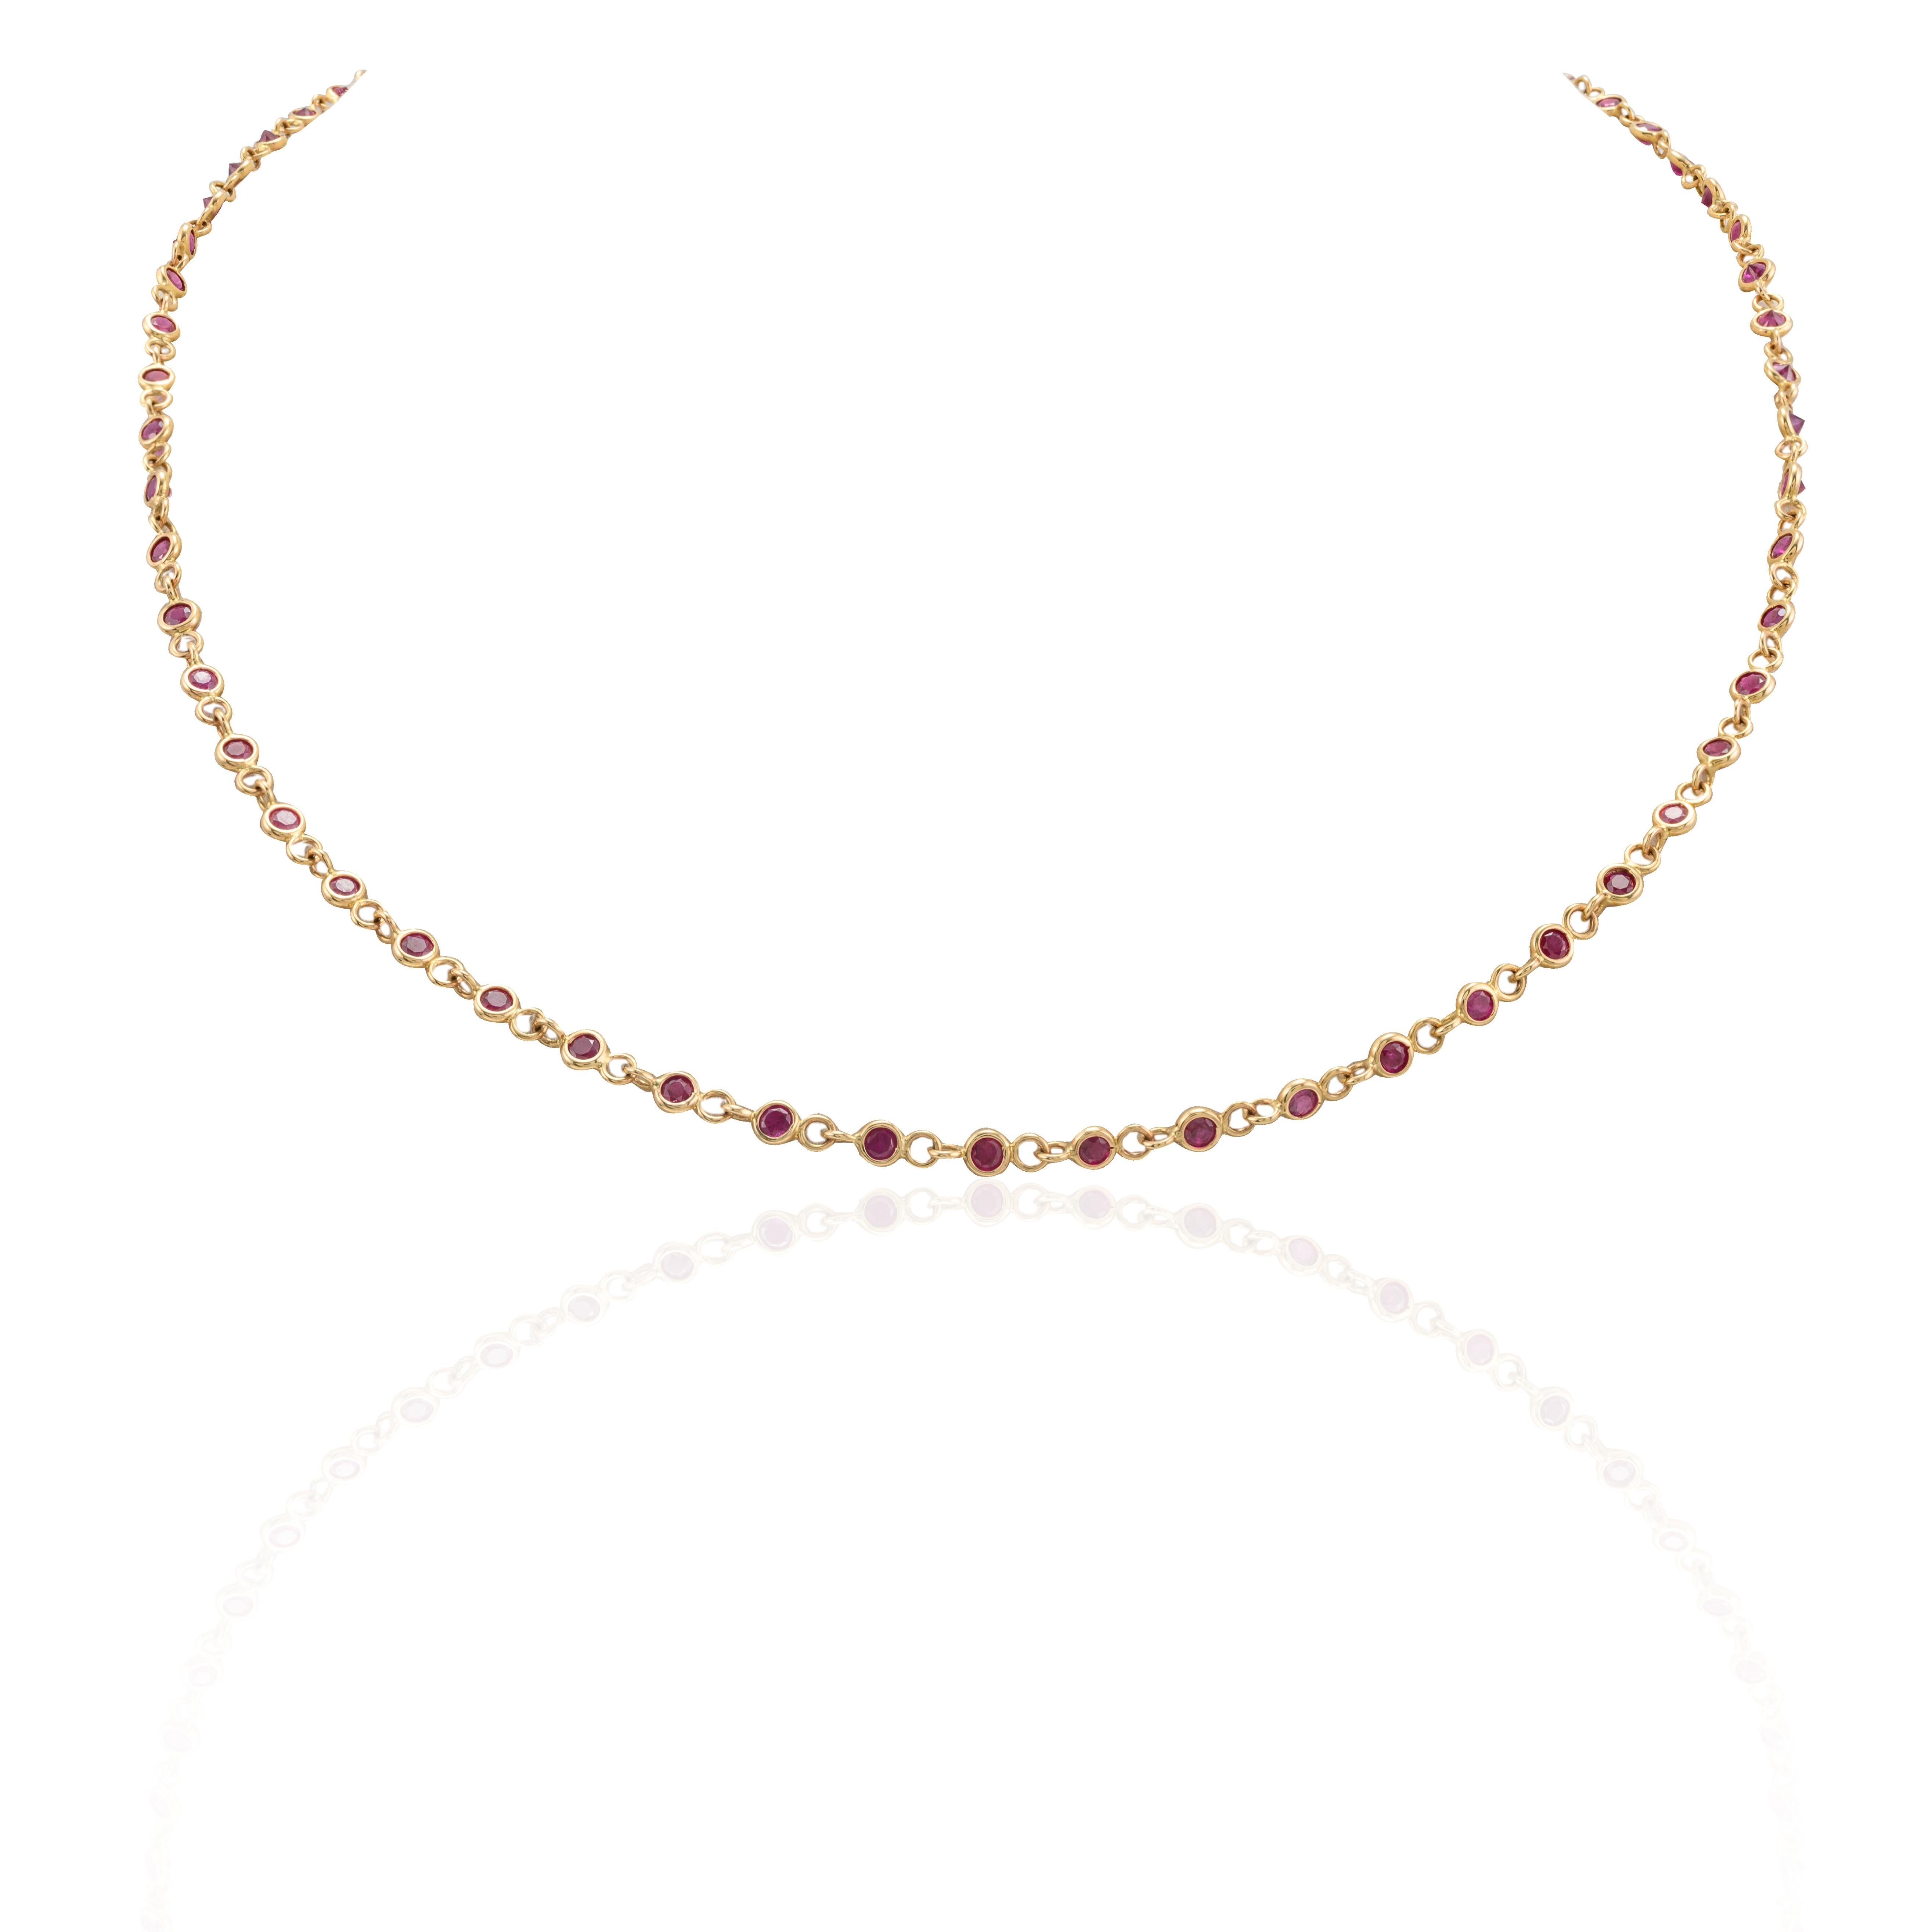 Contemporary Handmade Ruby Station Chain Necklace 14k Yellow Gold, Grandma Gift Christmas